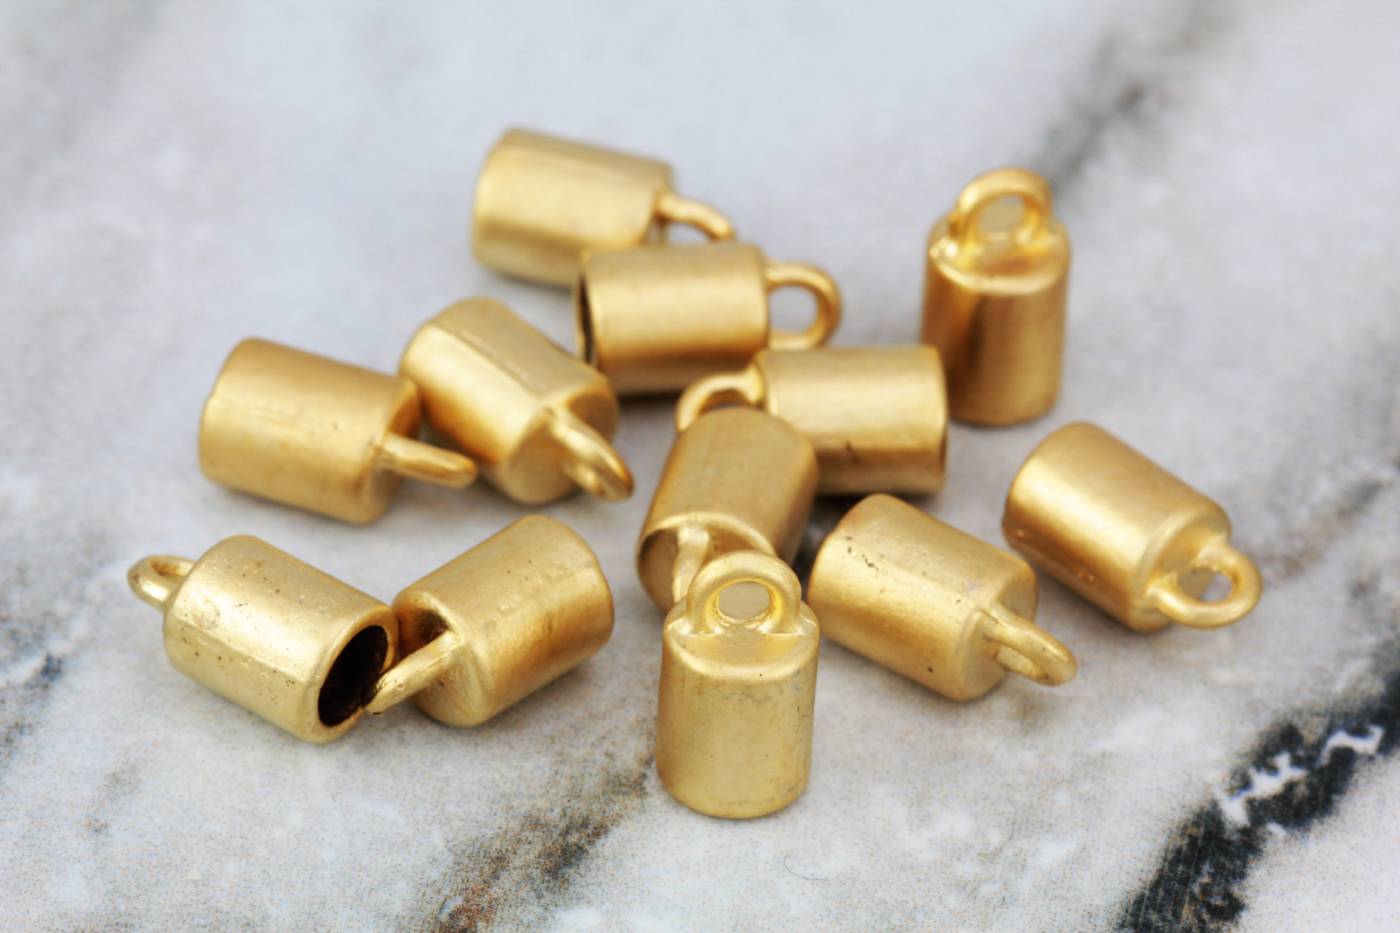 gold-metal-round-4mm-hole-end-caps